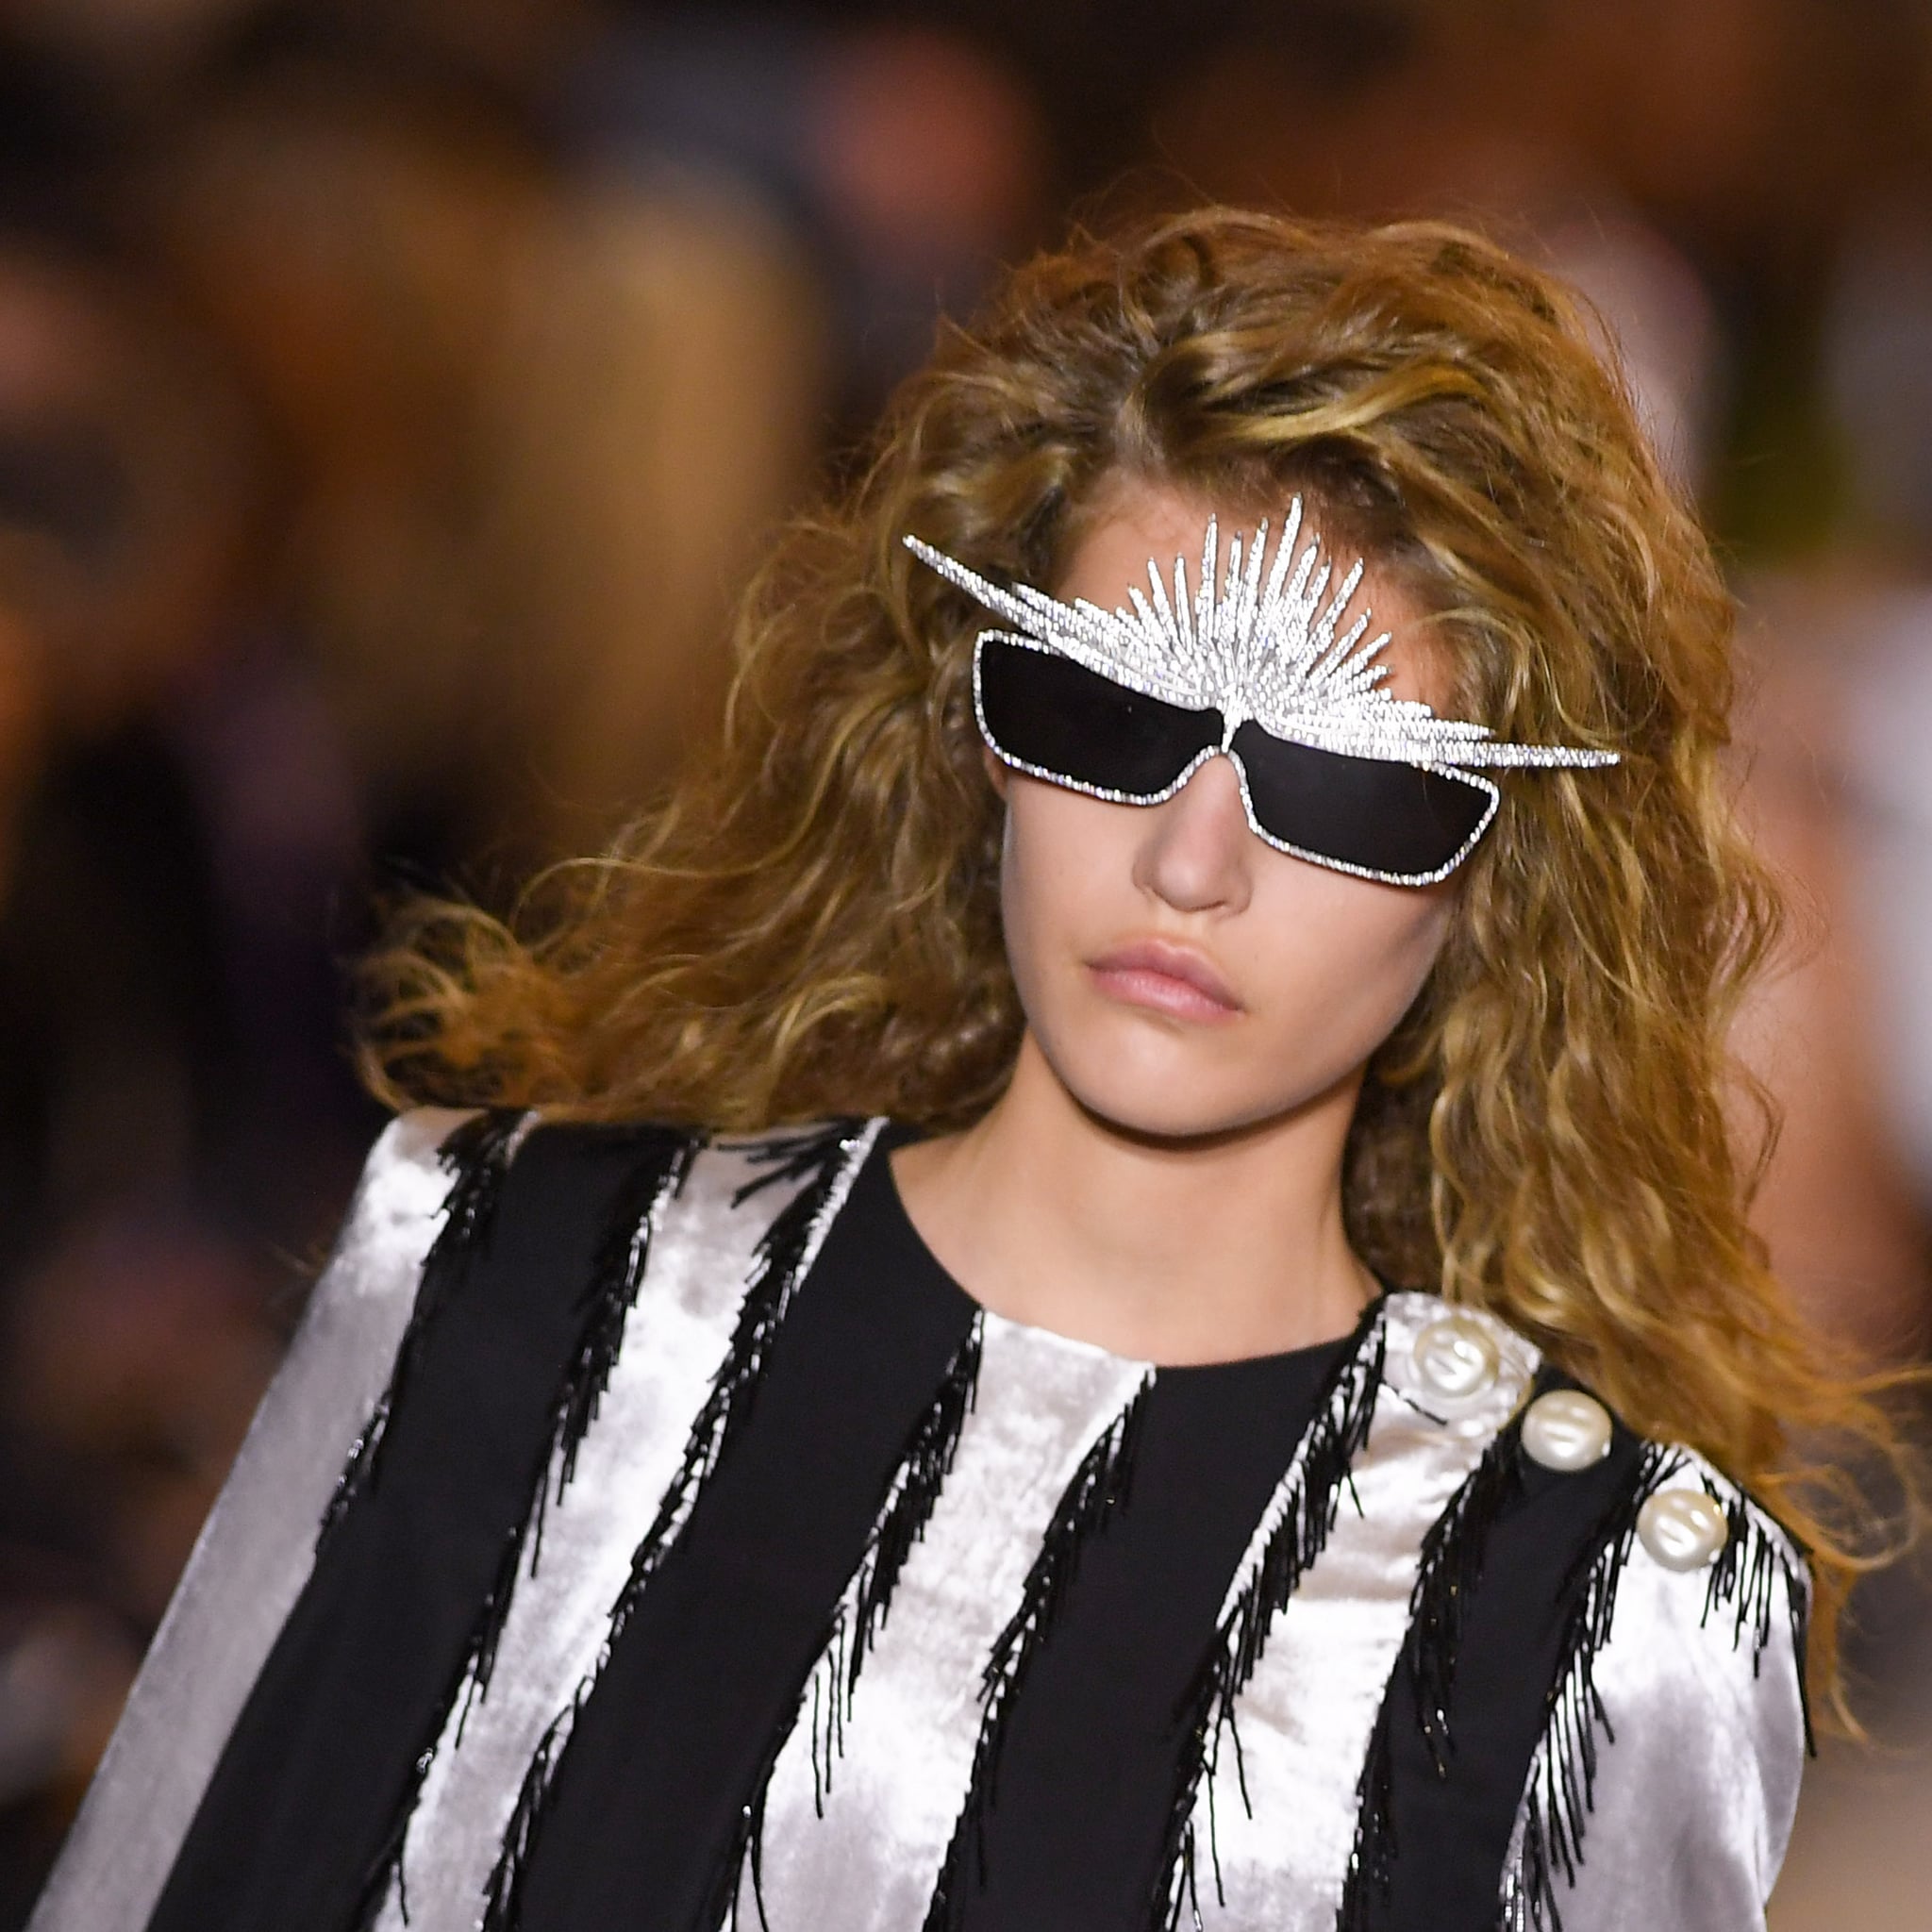 5 Things To Know About Louis Vuitton's Teen Spirit AW22 Show